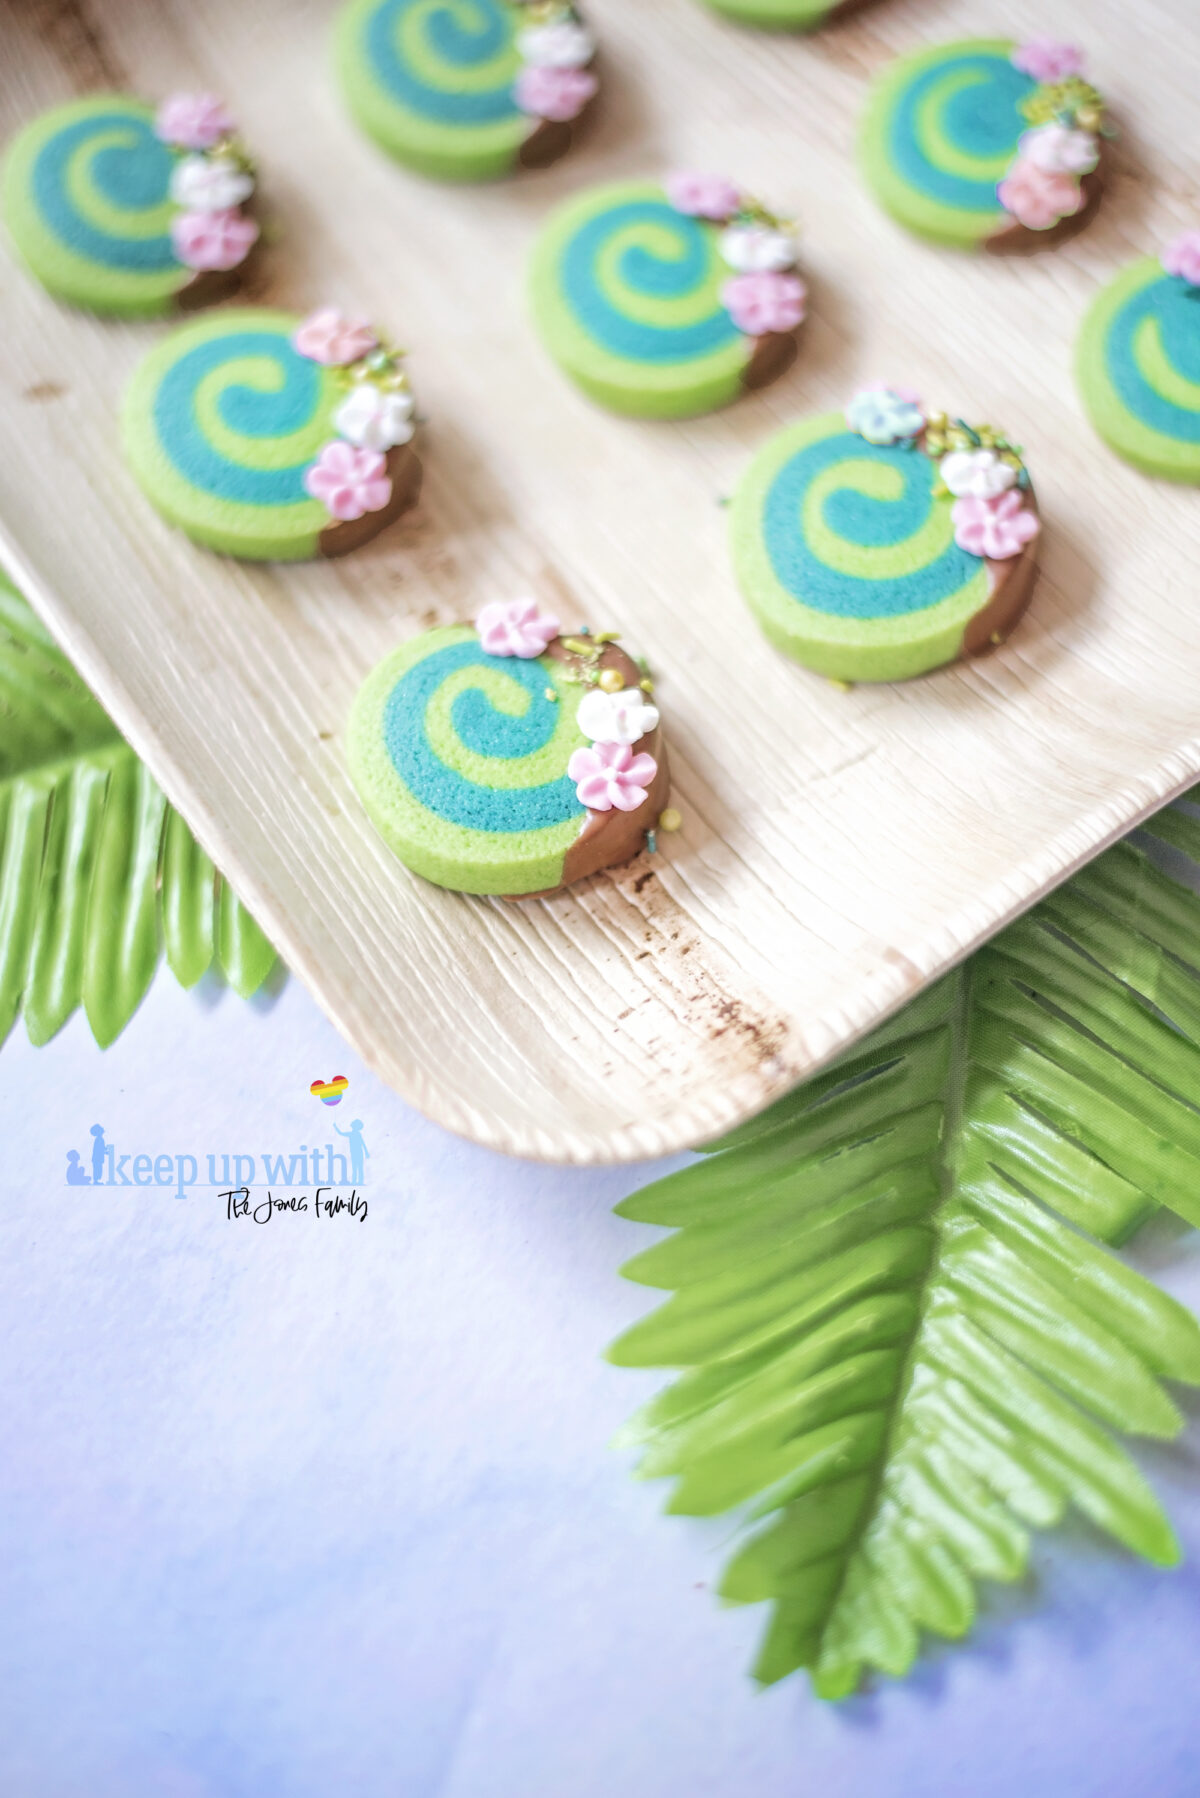 Image shows how to make Disney's Moana Heart of Te Fiti Biscuits, a swirl of bright and dark green, dipped slightly in milk chocolate and embellished with sugar blossom flowers and green sprinkles.  They are set on a bamboo plate with a fern underneath.  Image by keep up with the jones family.